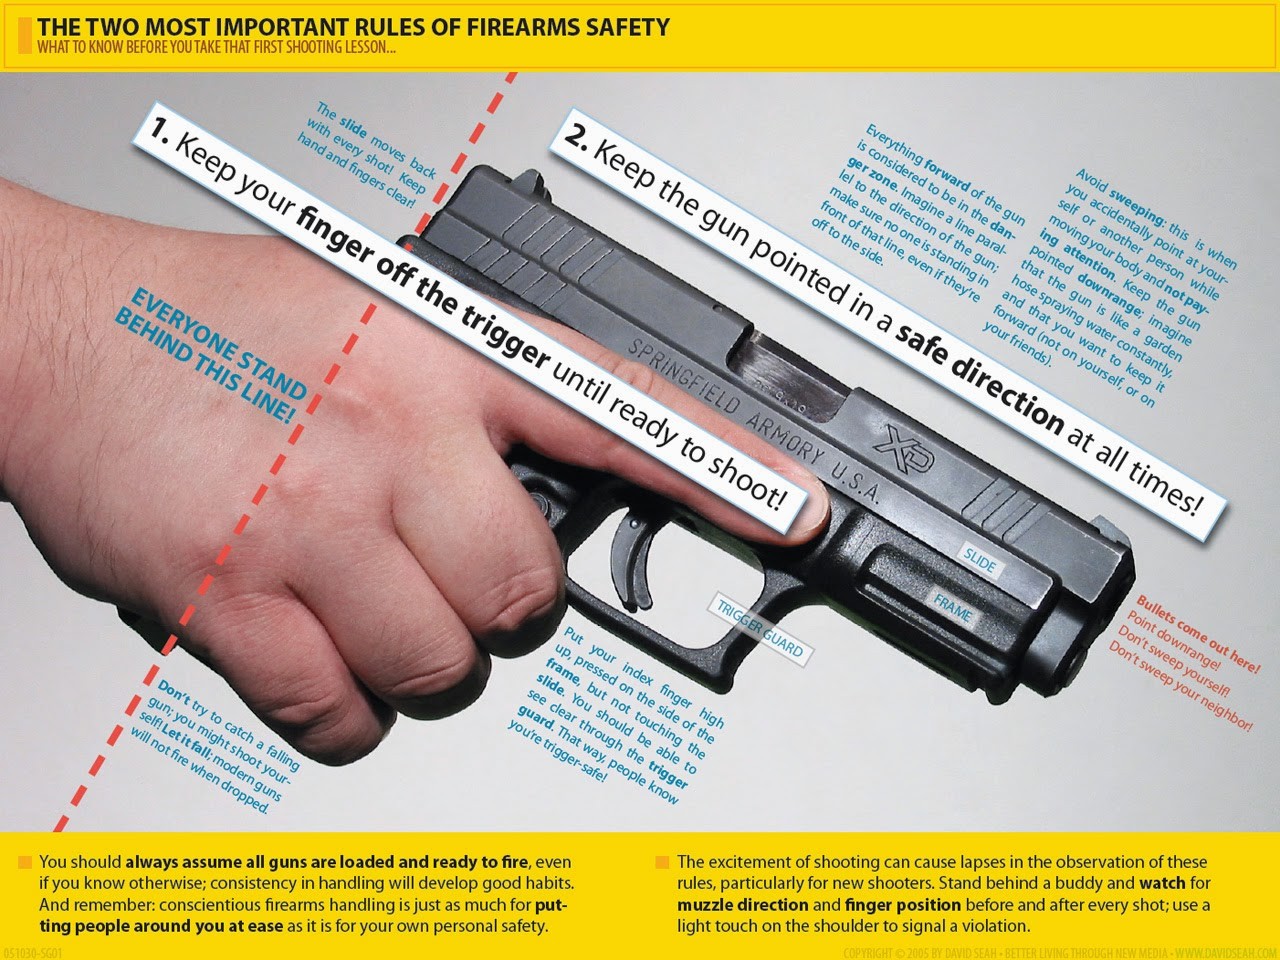 Firearms Safety, Firearms Safety – forming better gun handling habits.